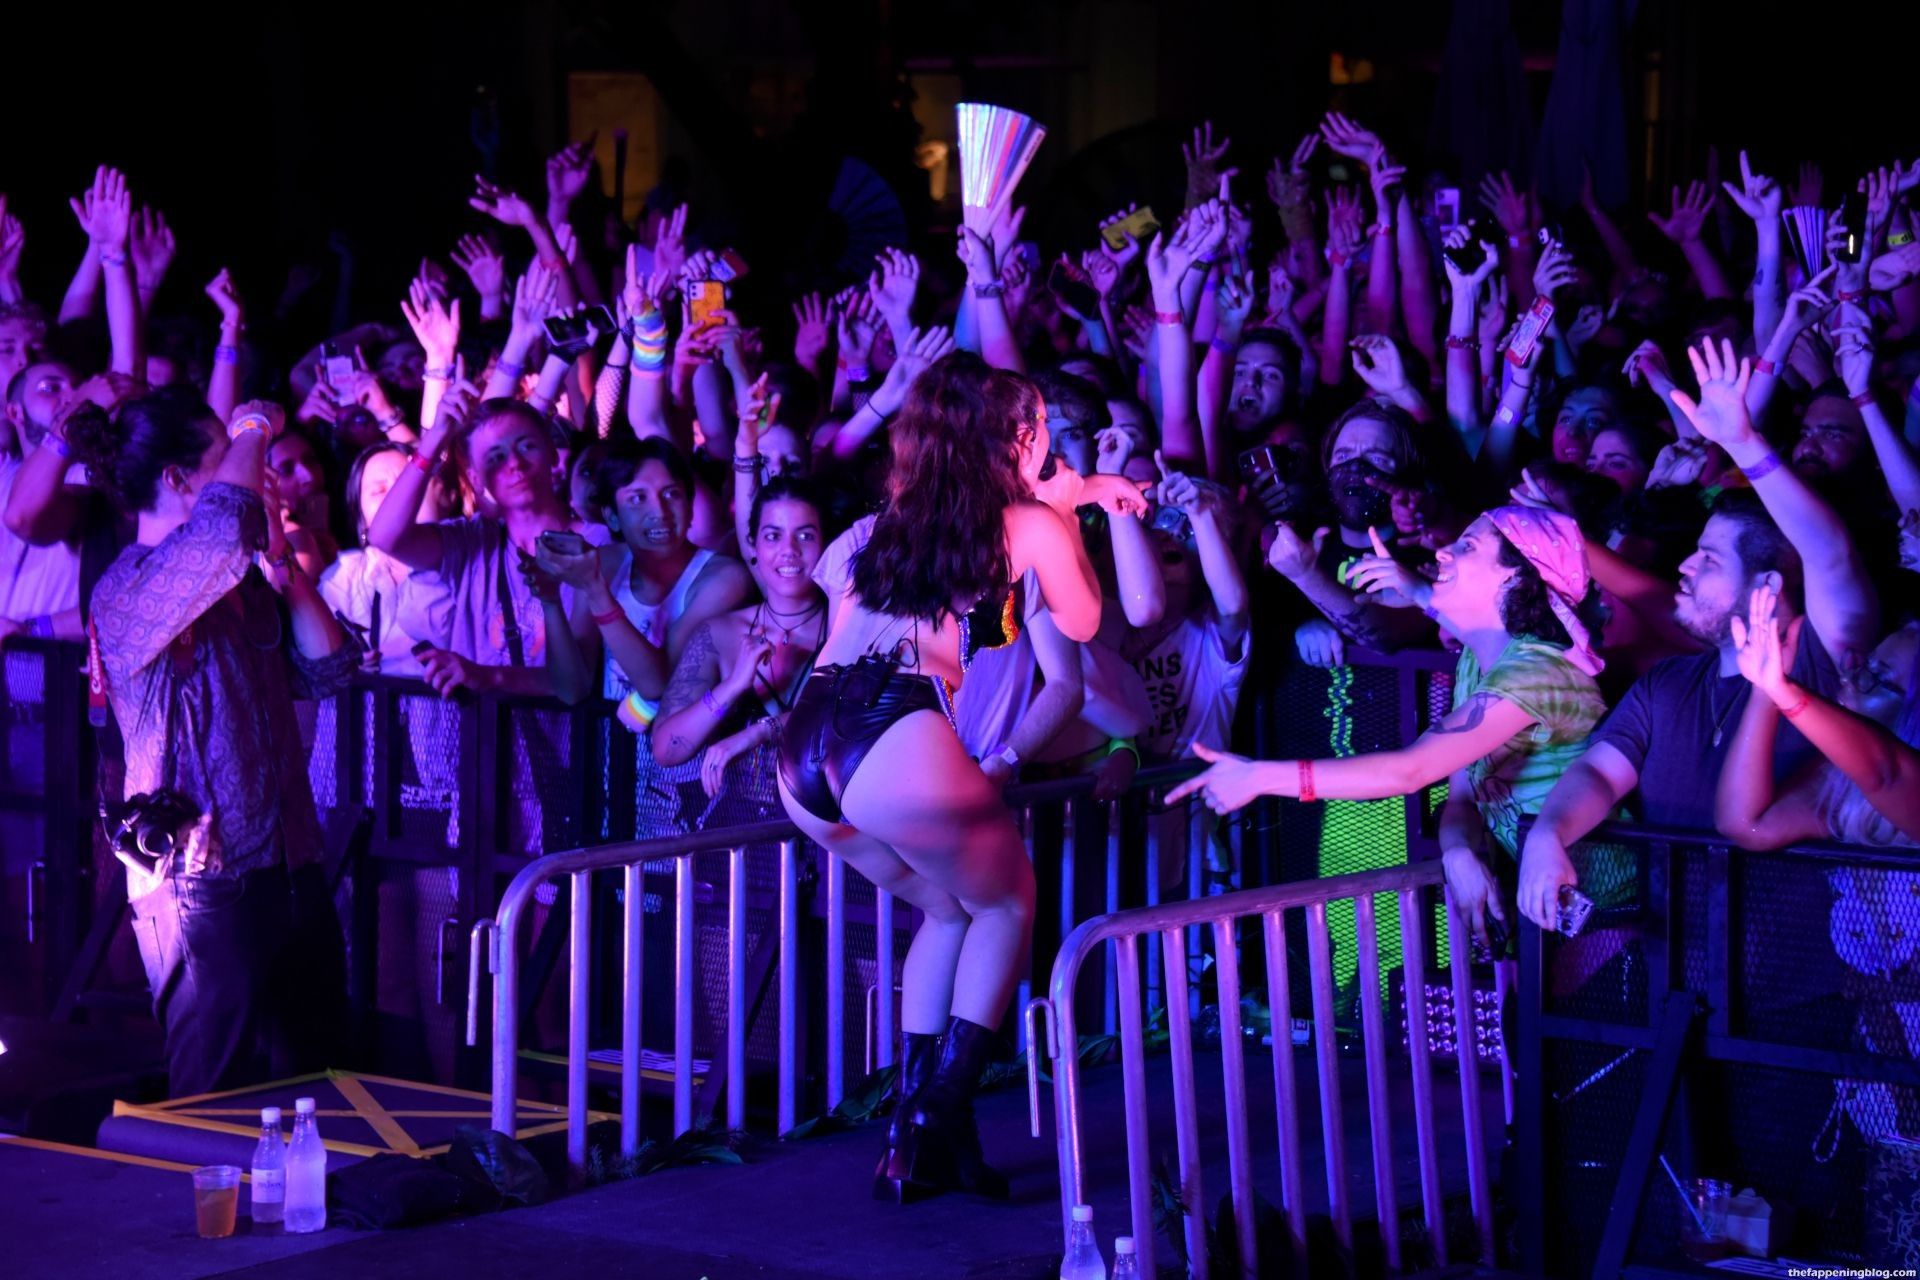 Charli-XCX-Sexy-on-Stage-22-thefappeningblog.com_.jpg